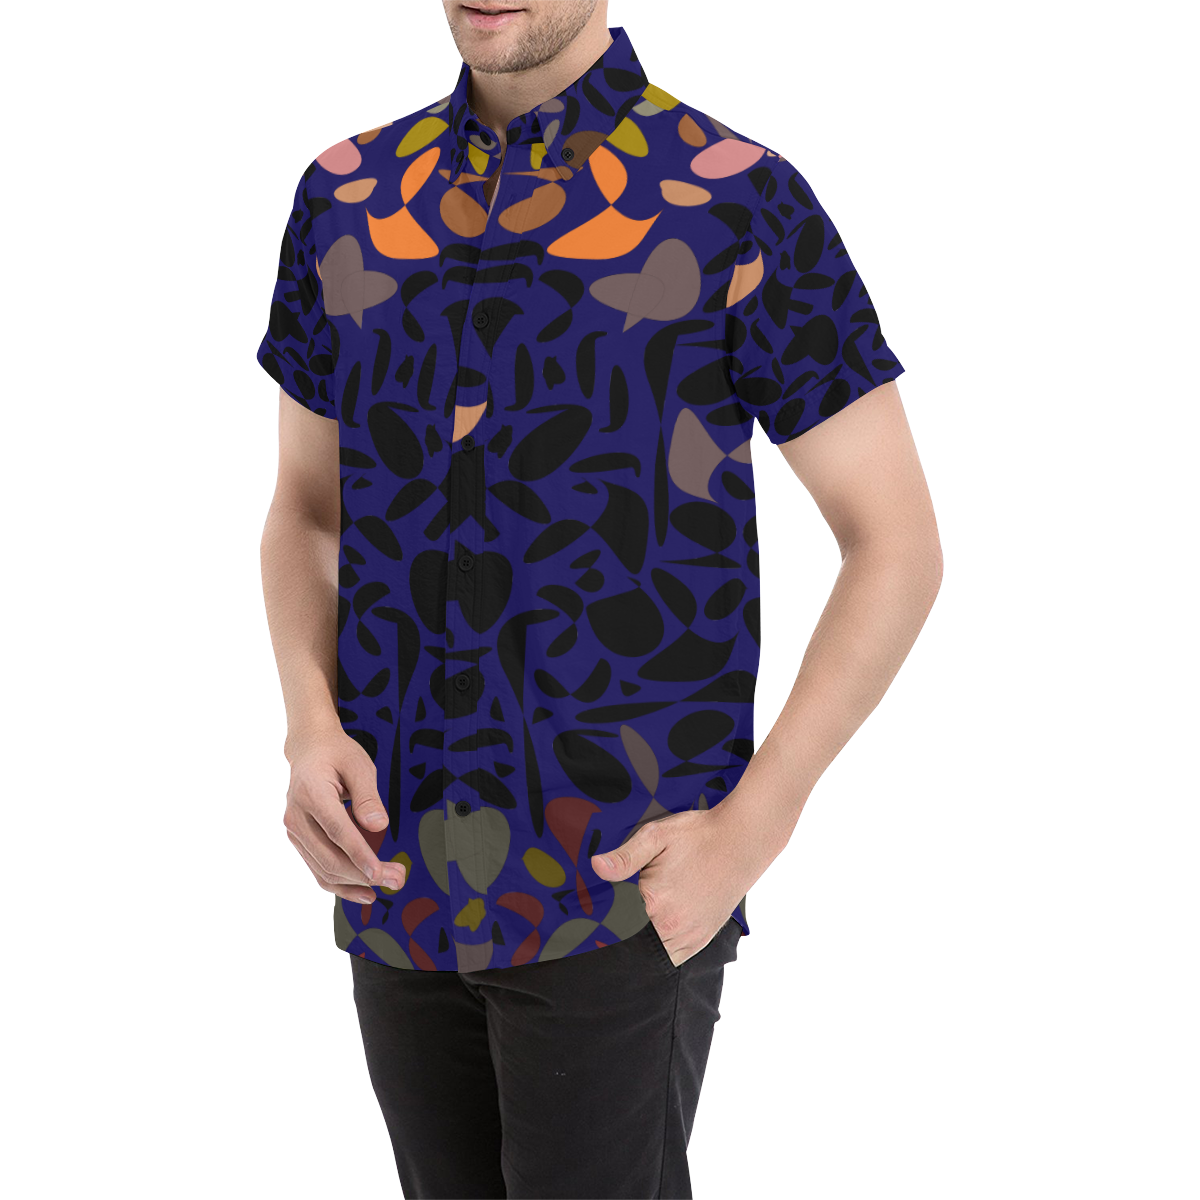 zappwaits z355 Men's All Over Print Short Sleeve Shirt/Large Size (Model T53)